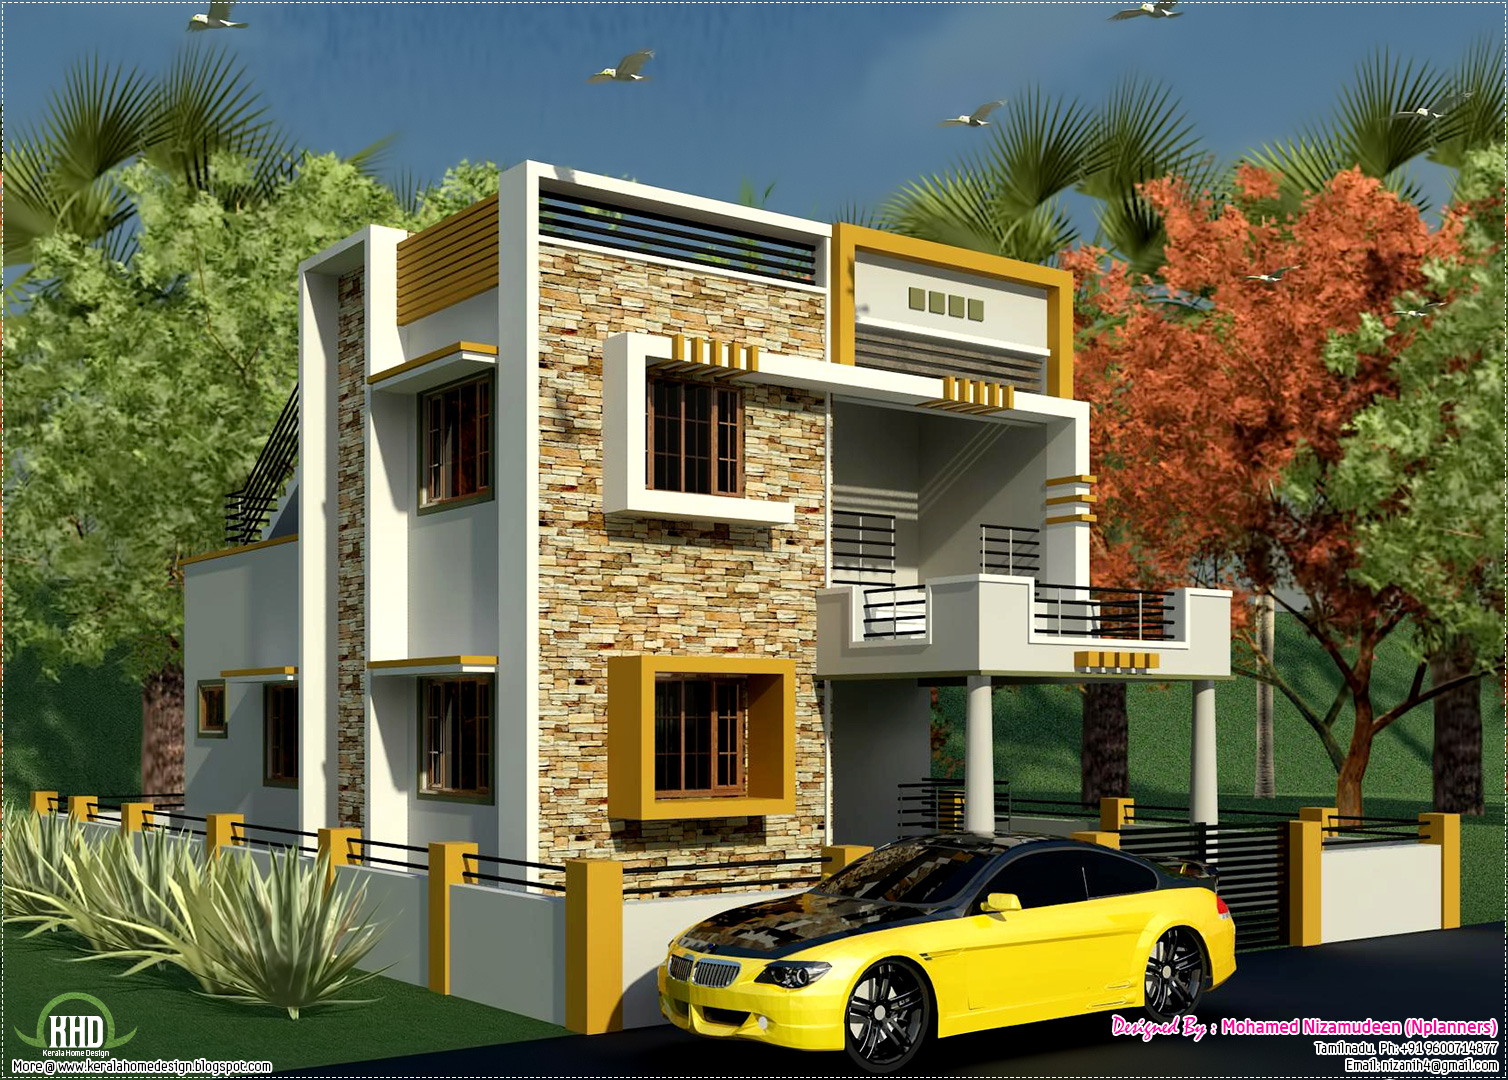 Kerala Home Design And Floor Plans 1484 Sqfeet South India House